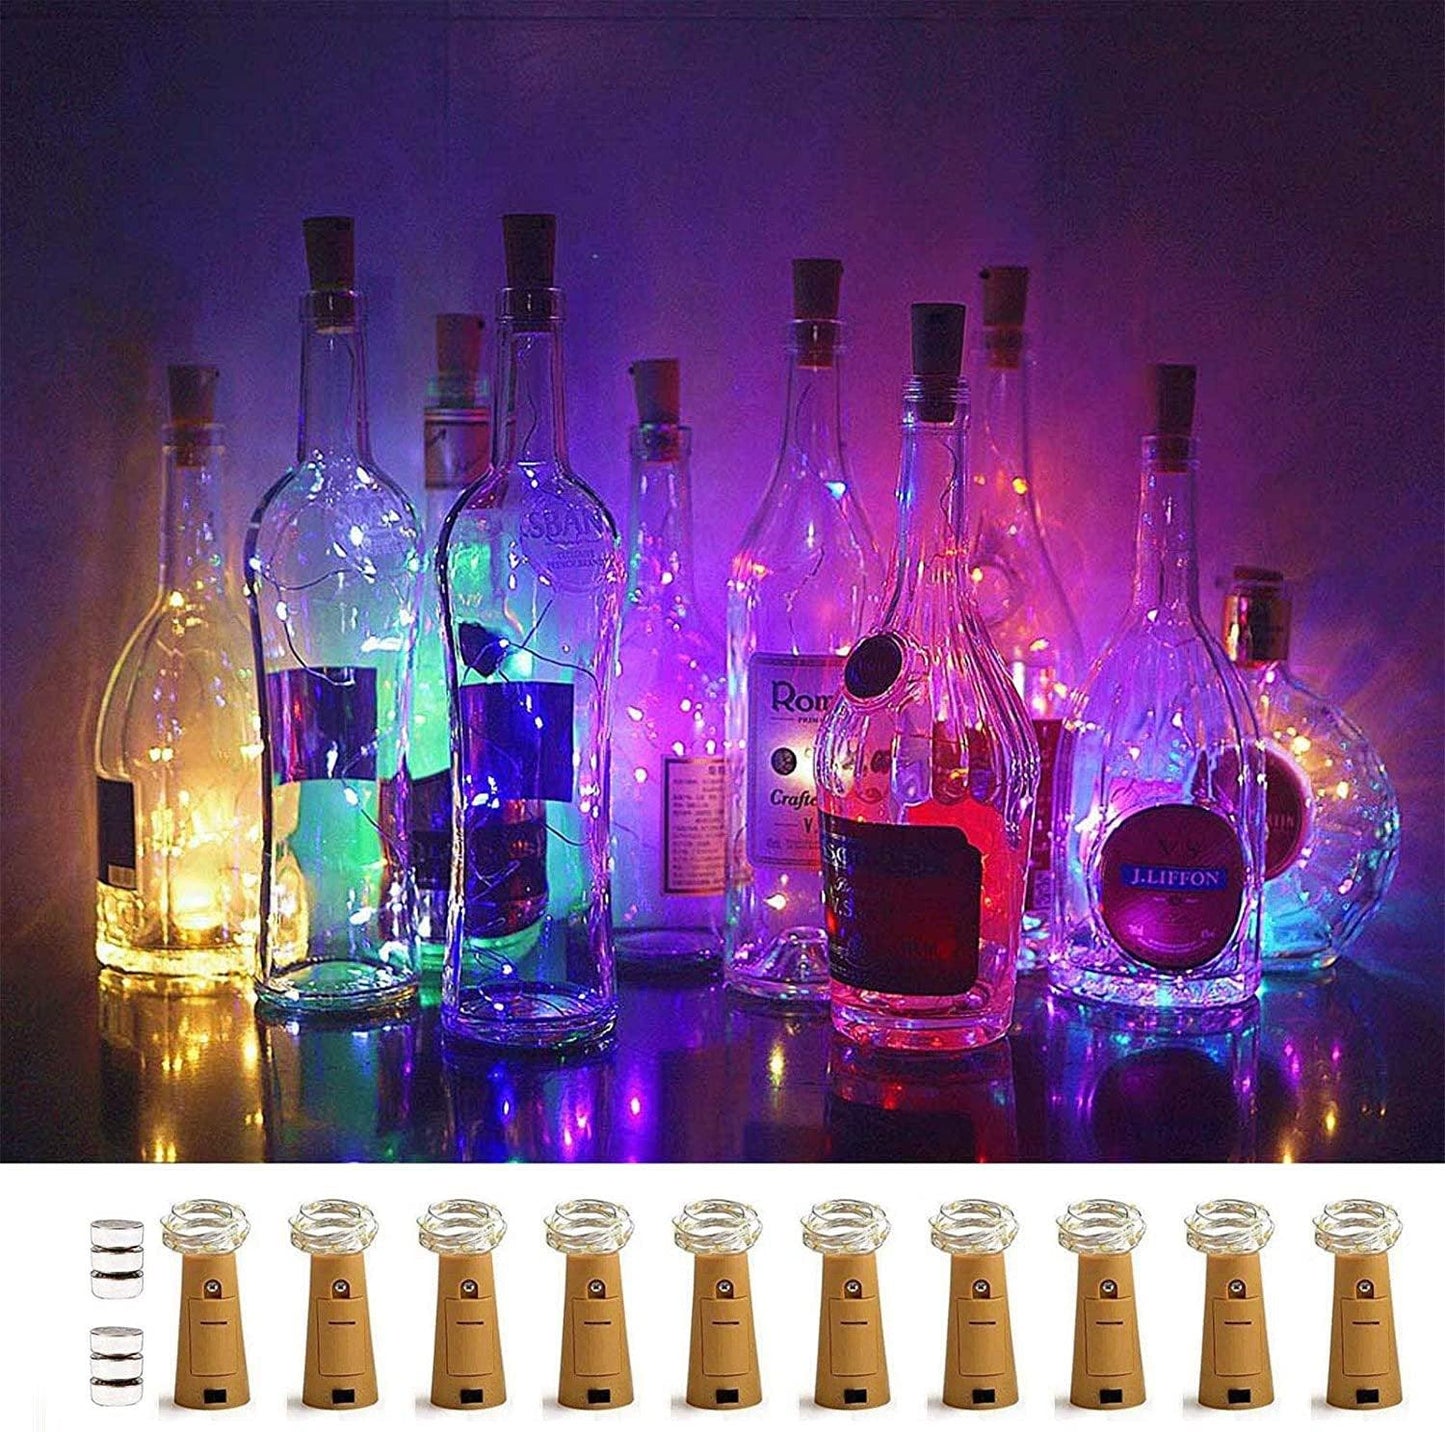 Wine Bottle Cork Lights10 LED/ 40 Inches Battery Operated Cork Shape Copper Wire Colorful Fairy Mini String Lights - If you say i do